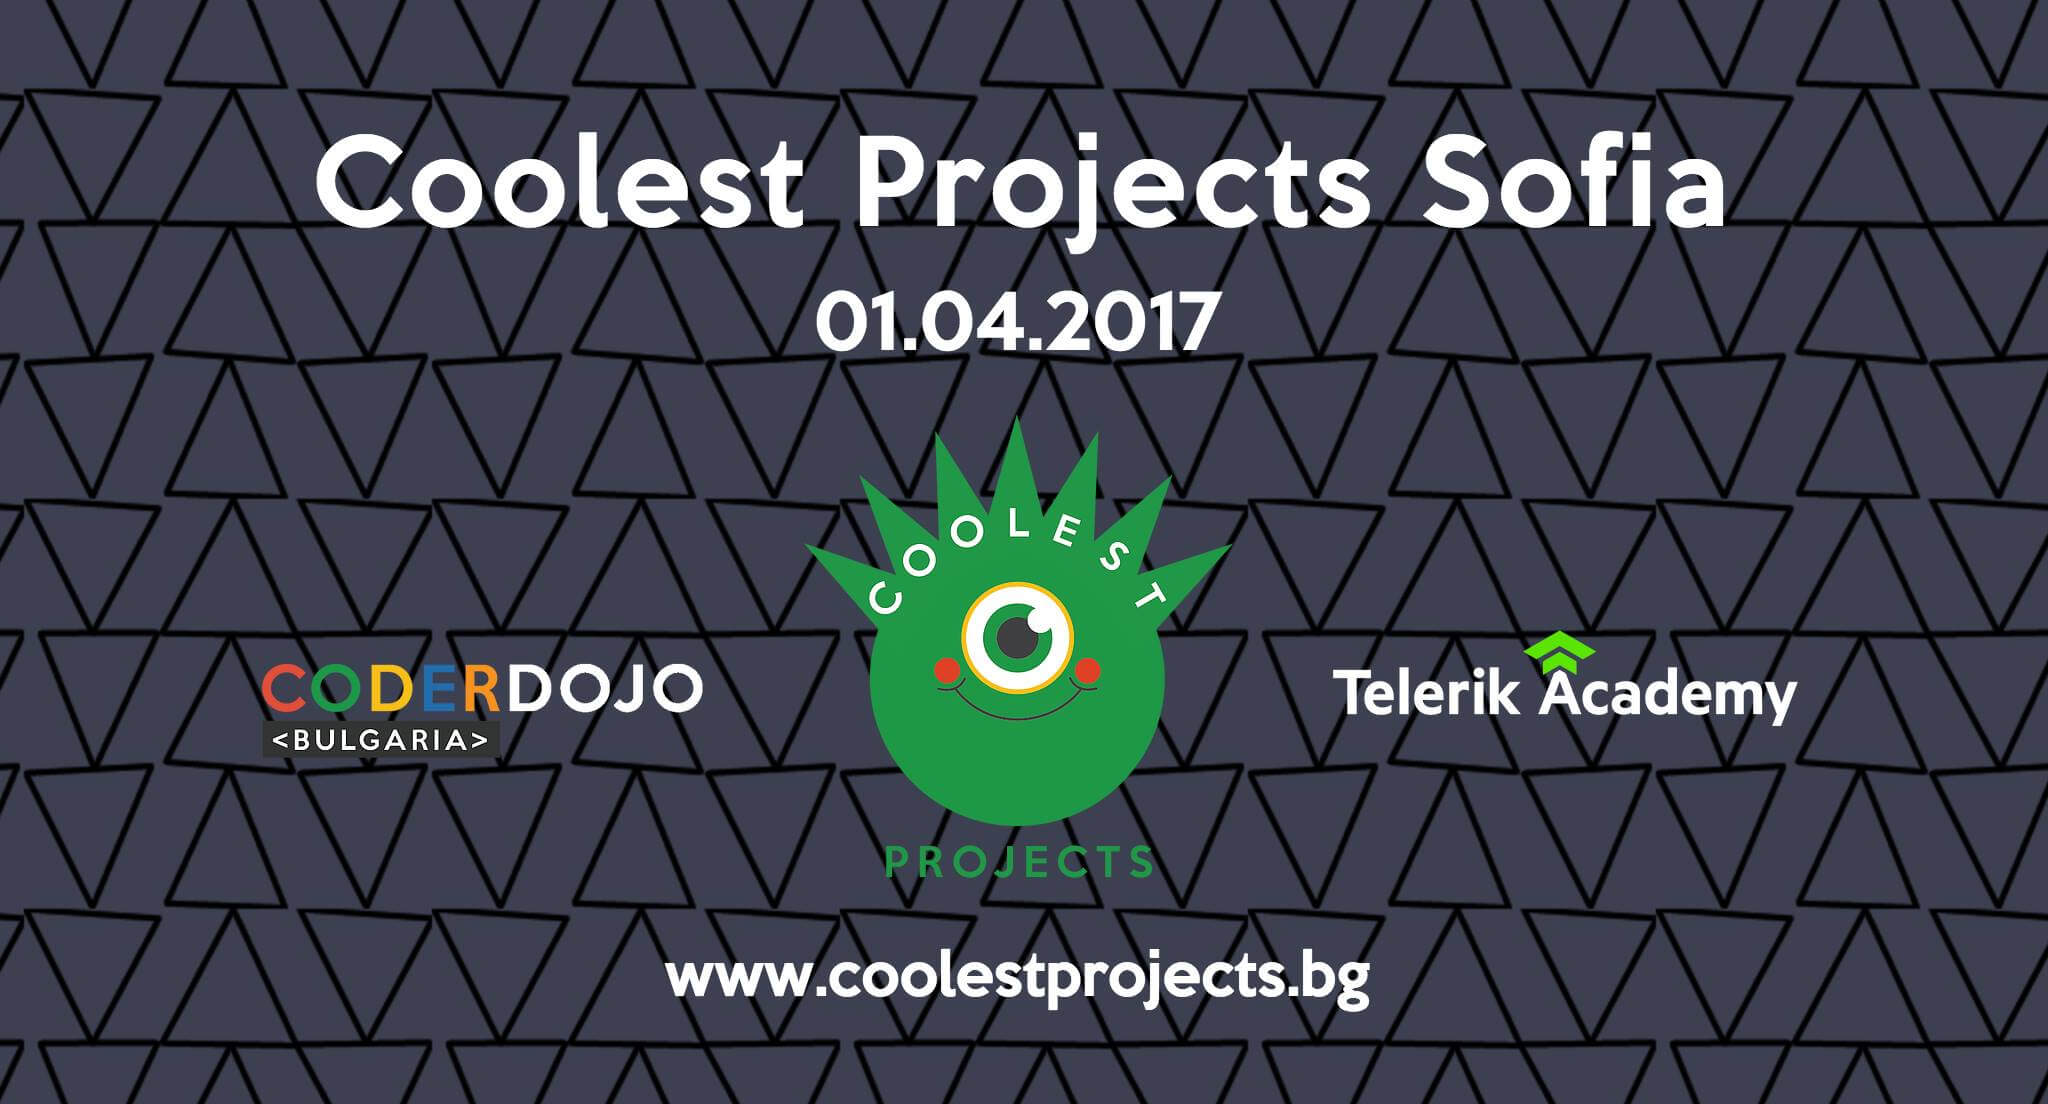 Coolest Projects Sofia